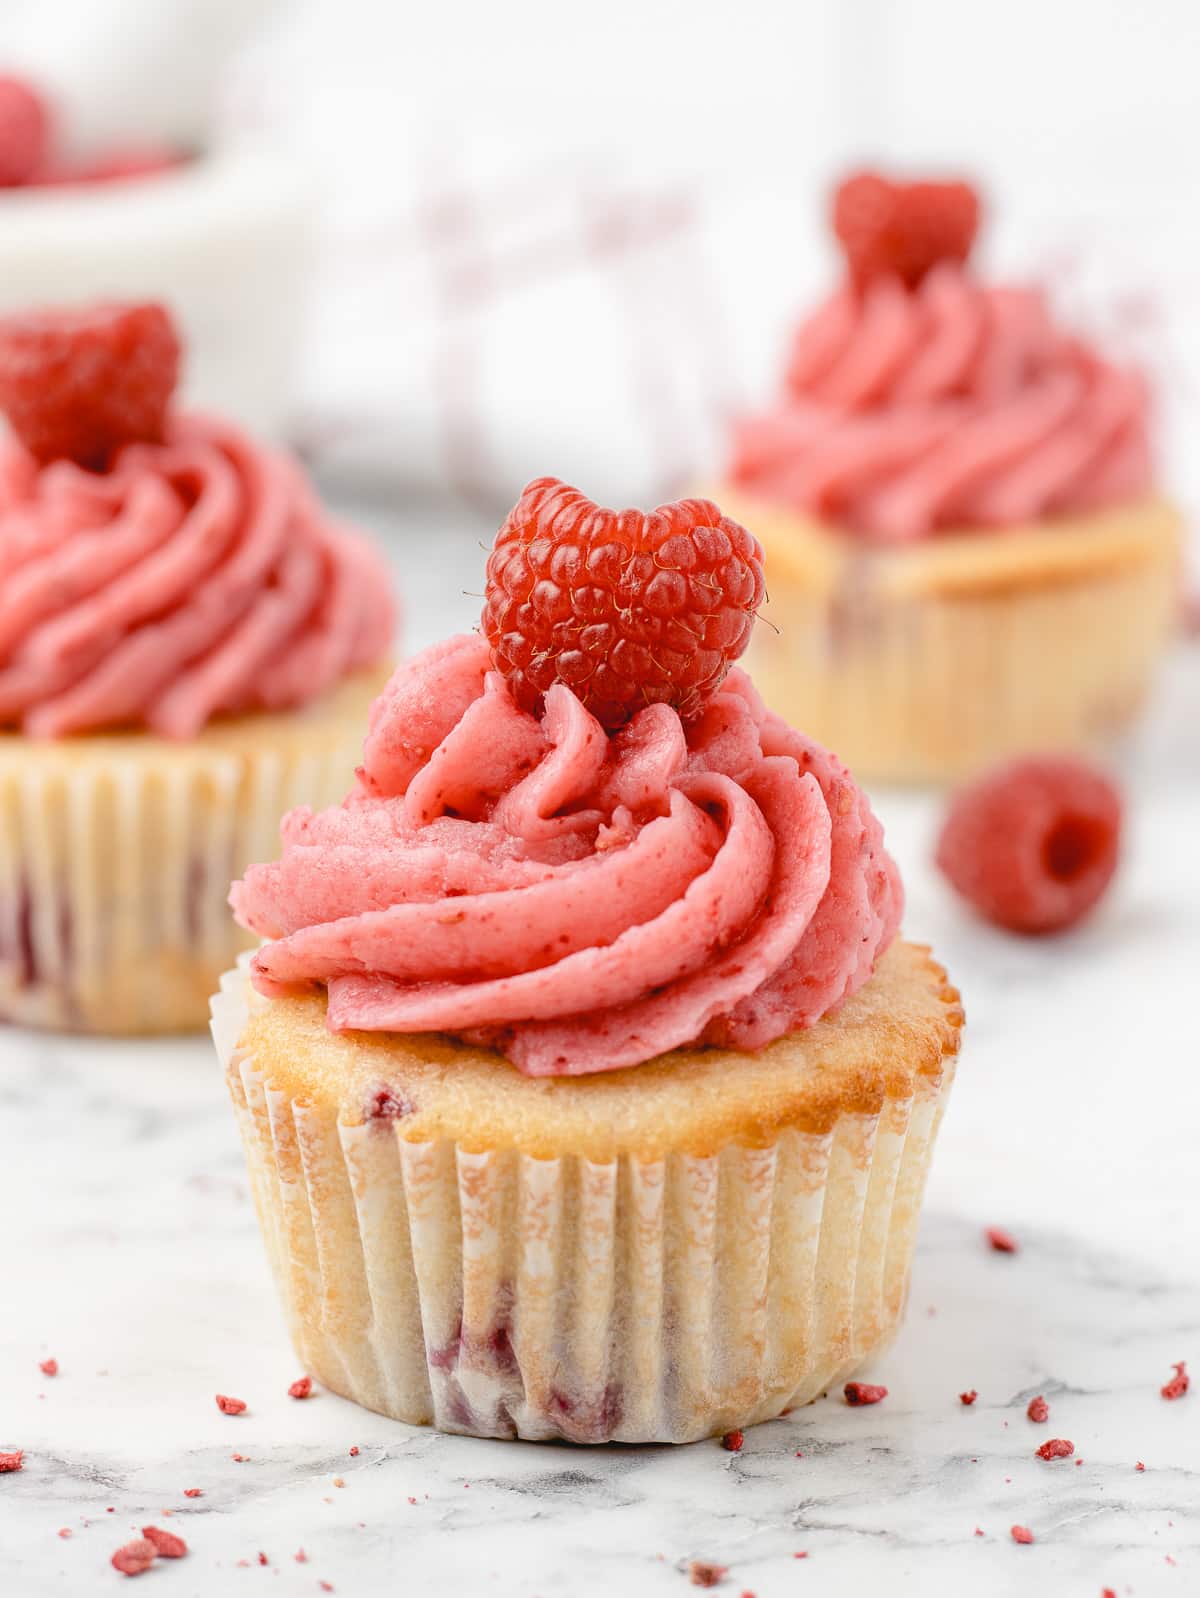 Cupcakes filled with fresh raspberries, topped with raspberry buttercream, and garnished with a fresh raspberry.